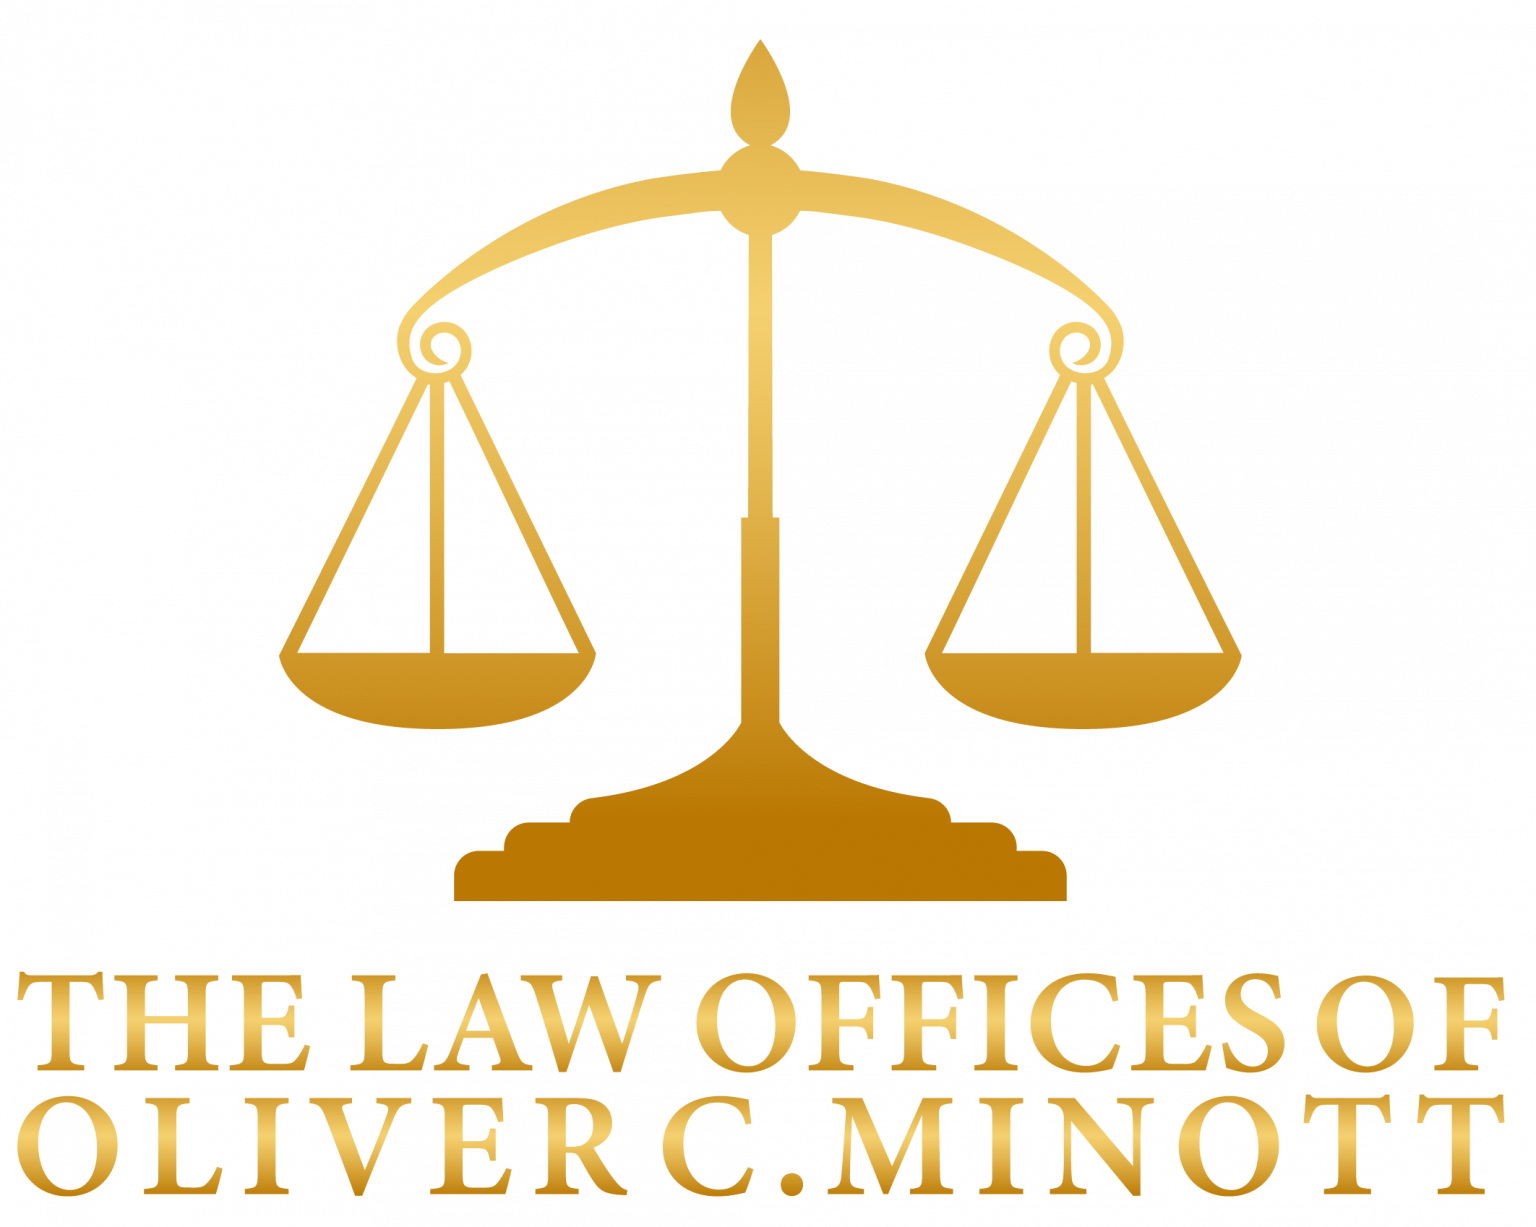 Company logo of The Law Offices of Oliver C. Minott